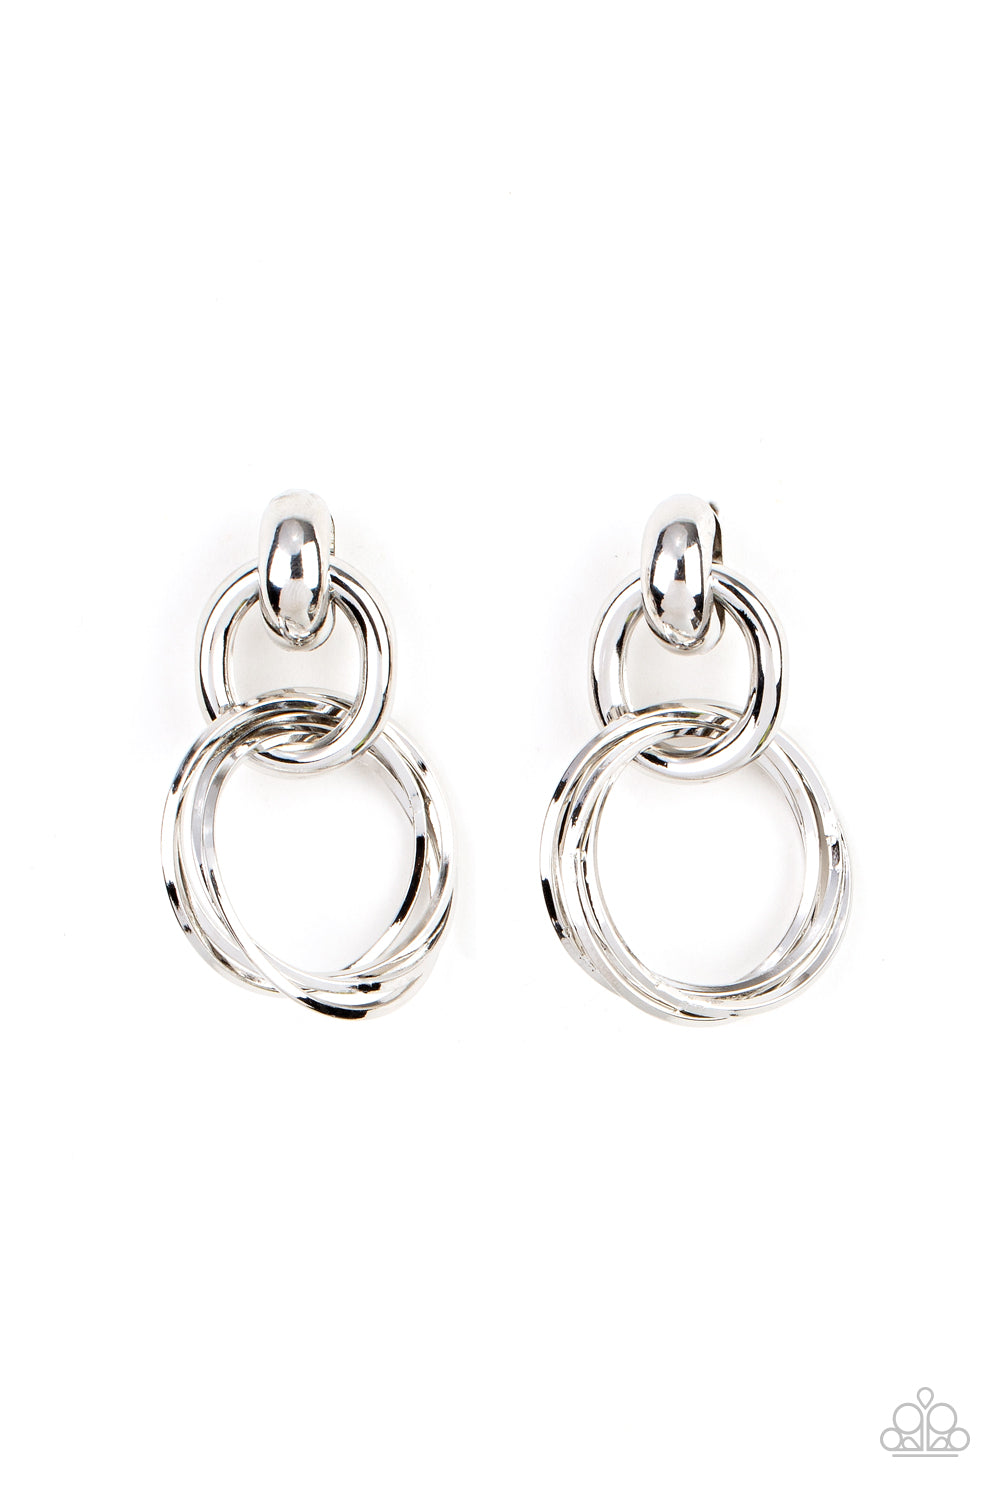 Convegence Post Earrings in Bright Silver